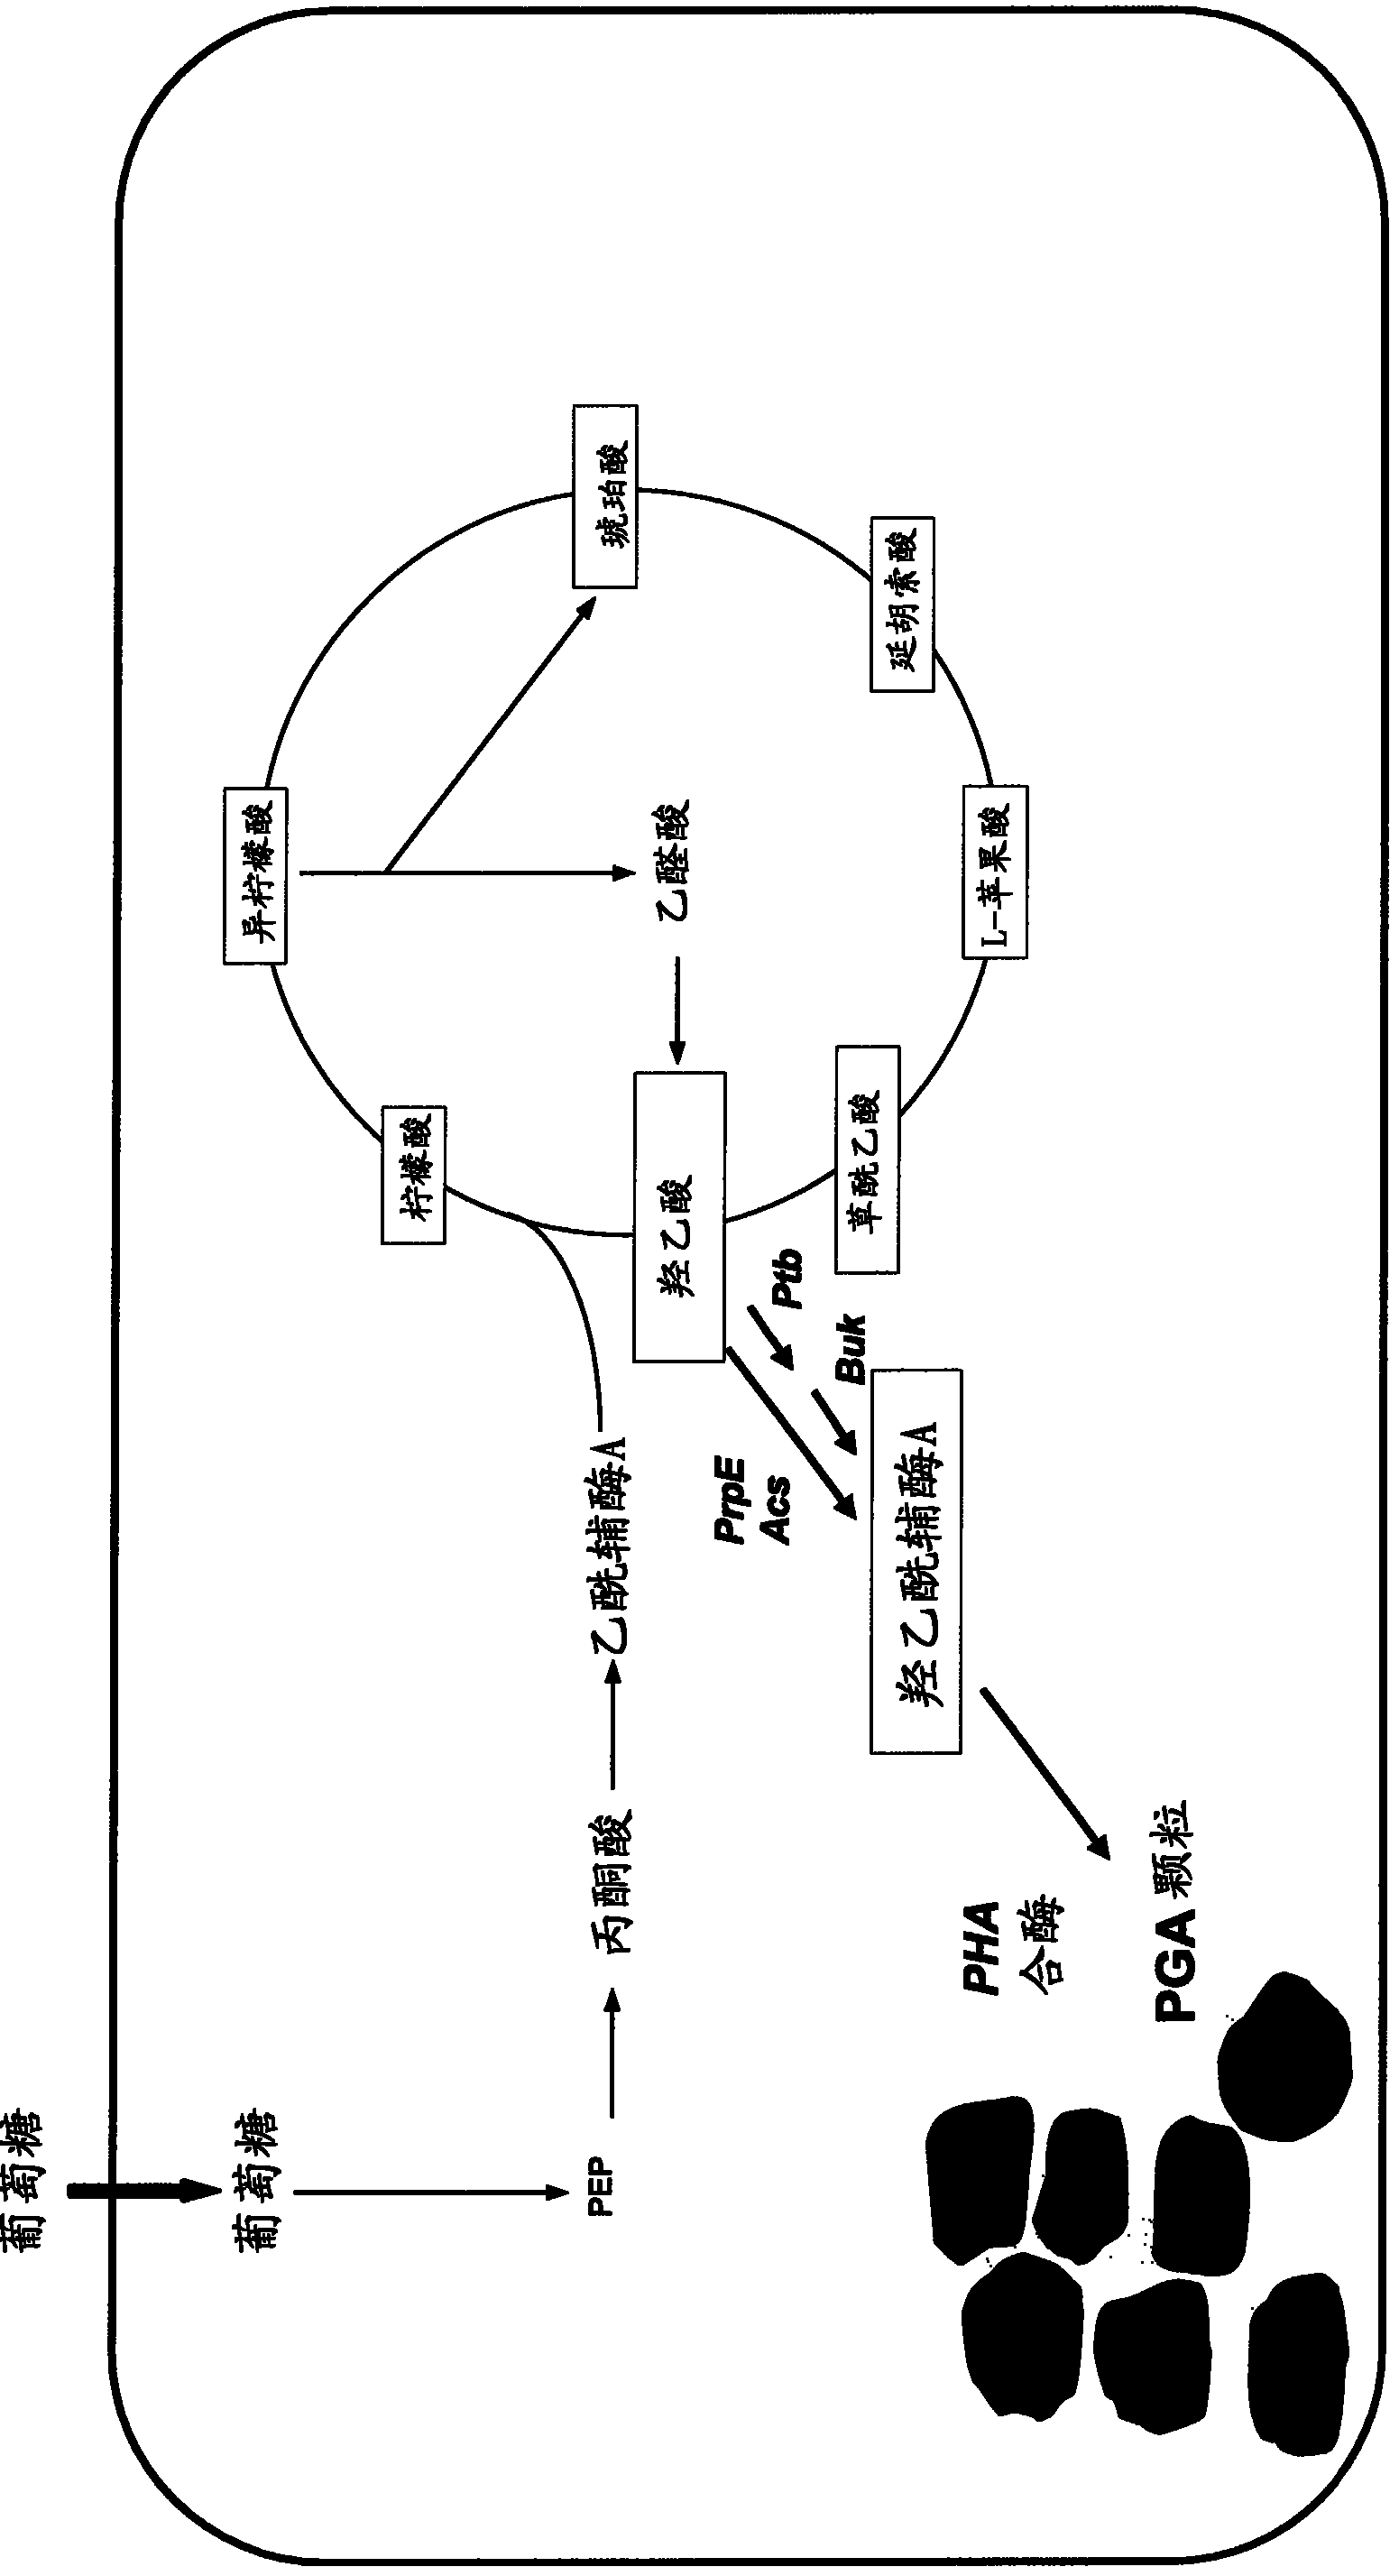 Method for polymerising glycolic acid with microorganisms